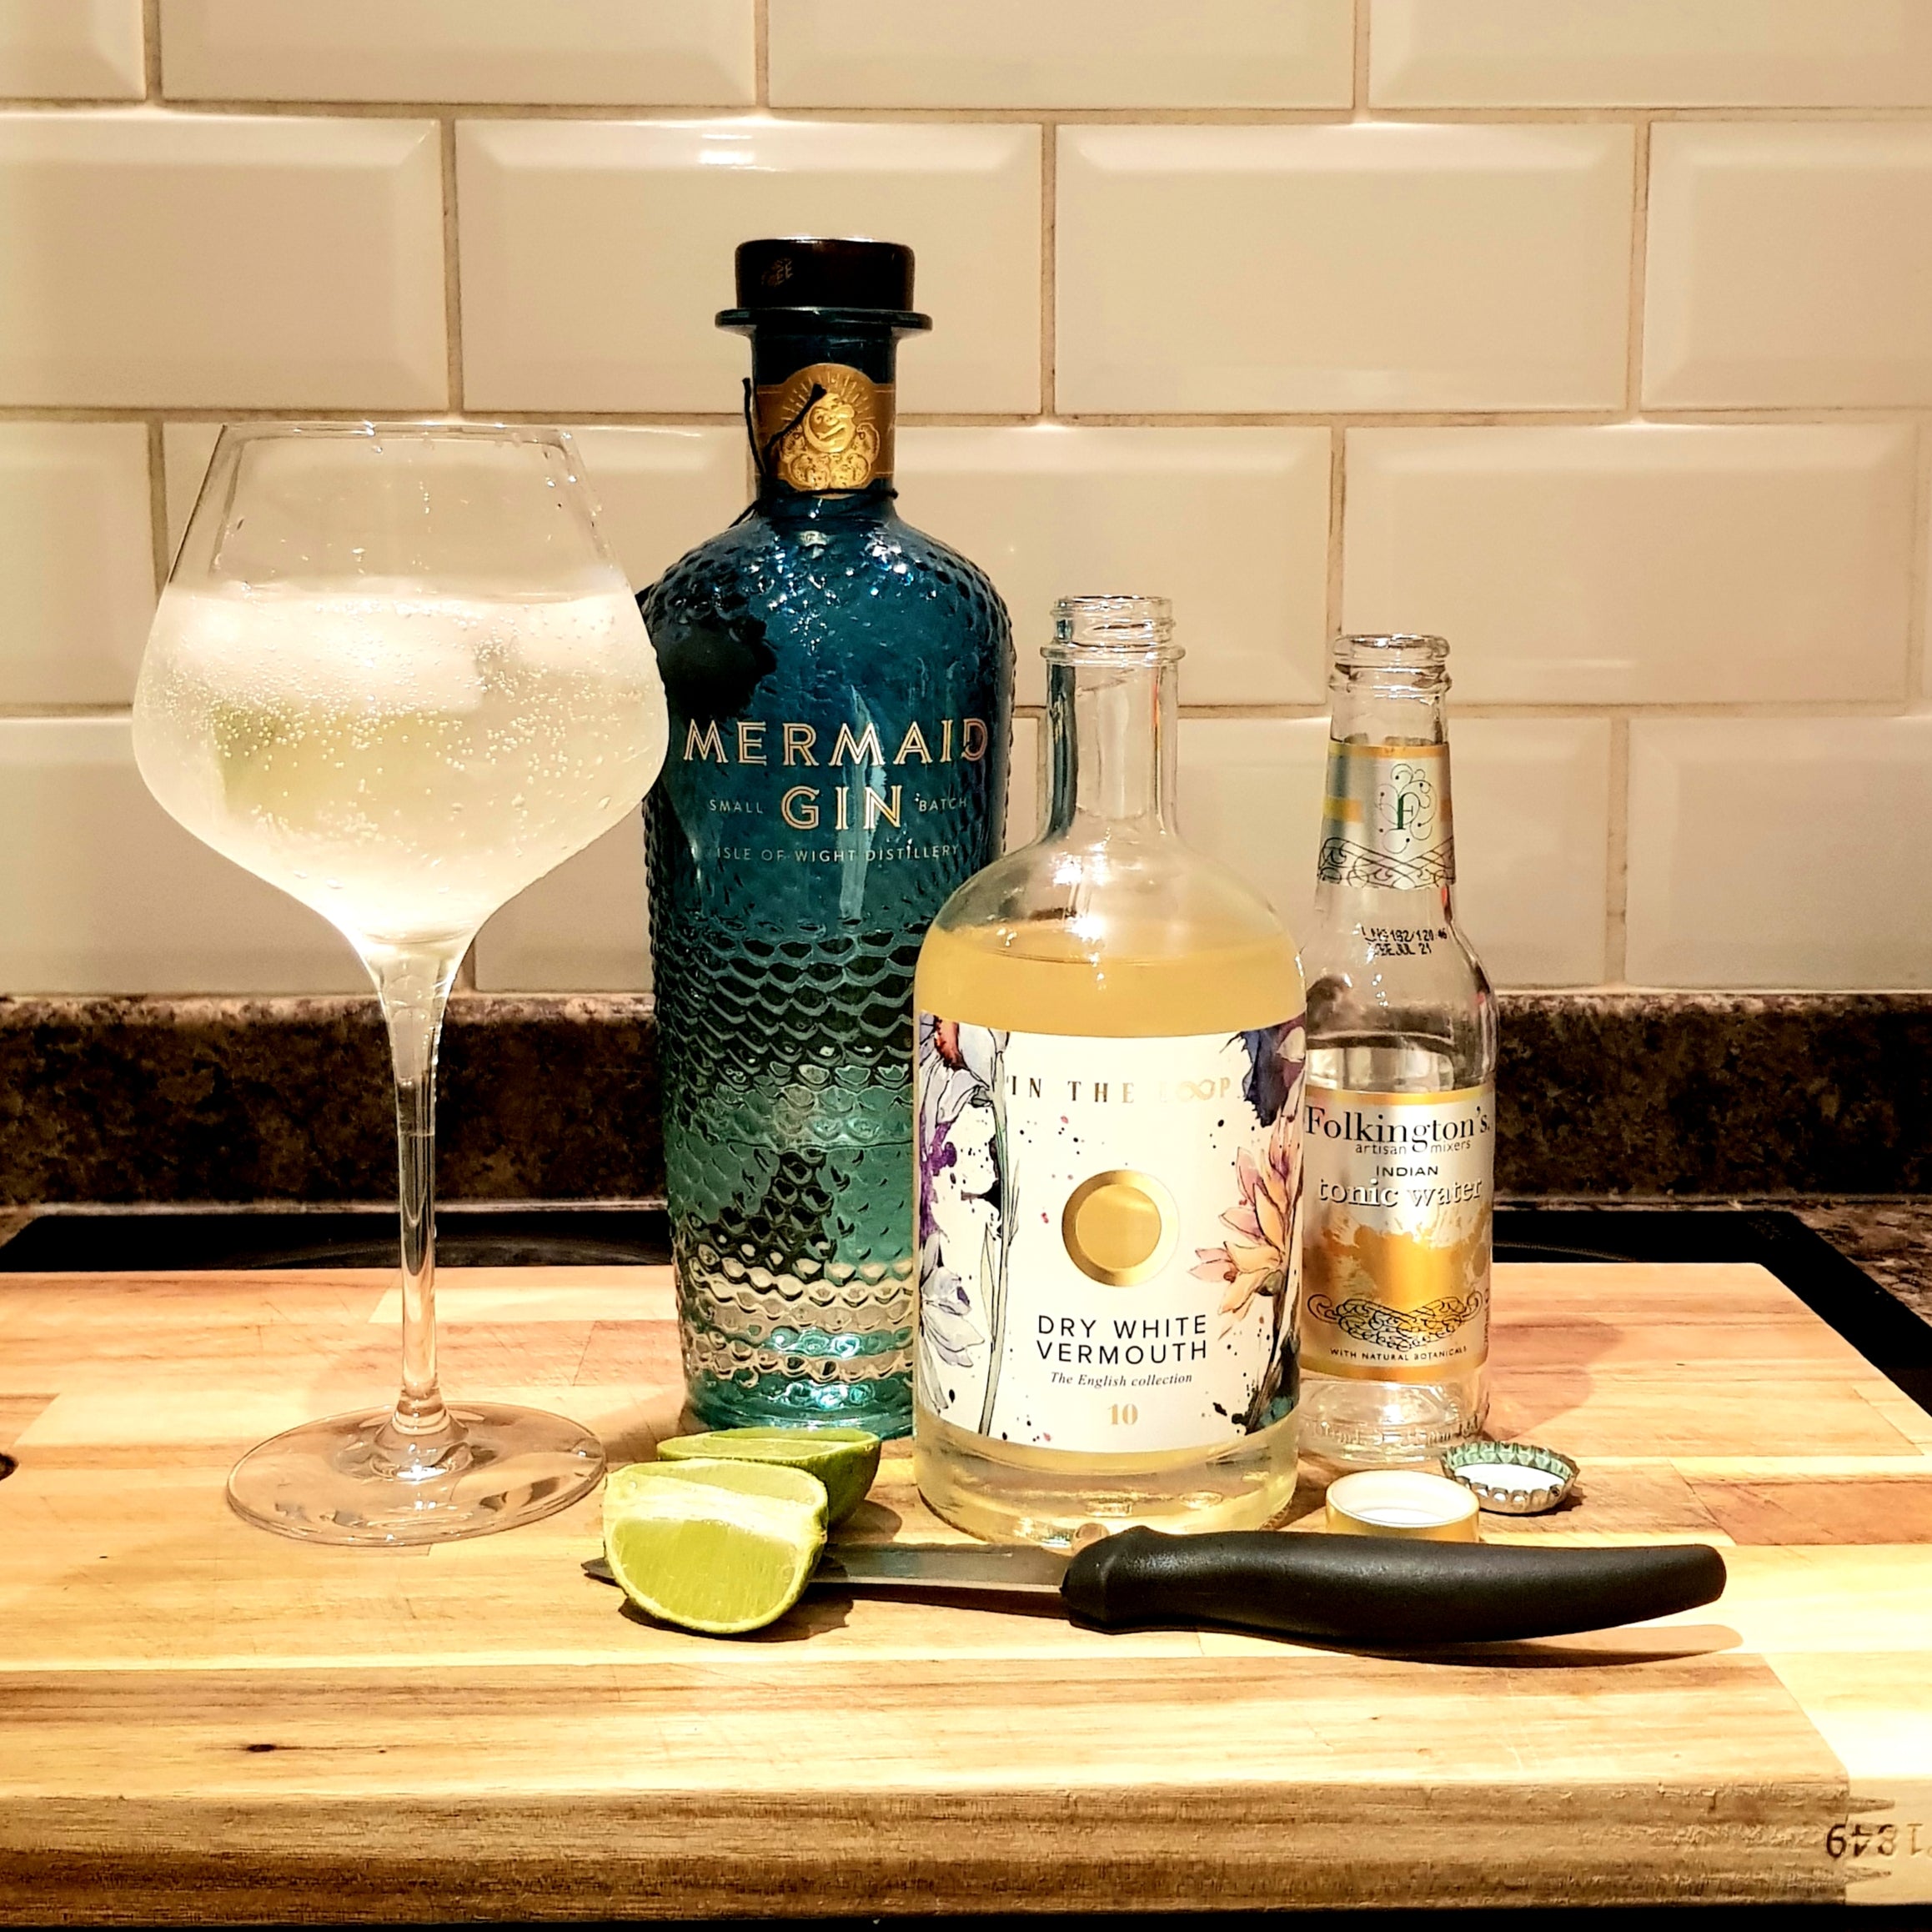 Mermaid gin, dry white vermouth and folkington tonic combine to make a g,v&t